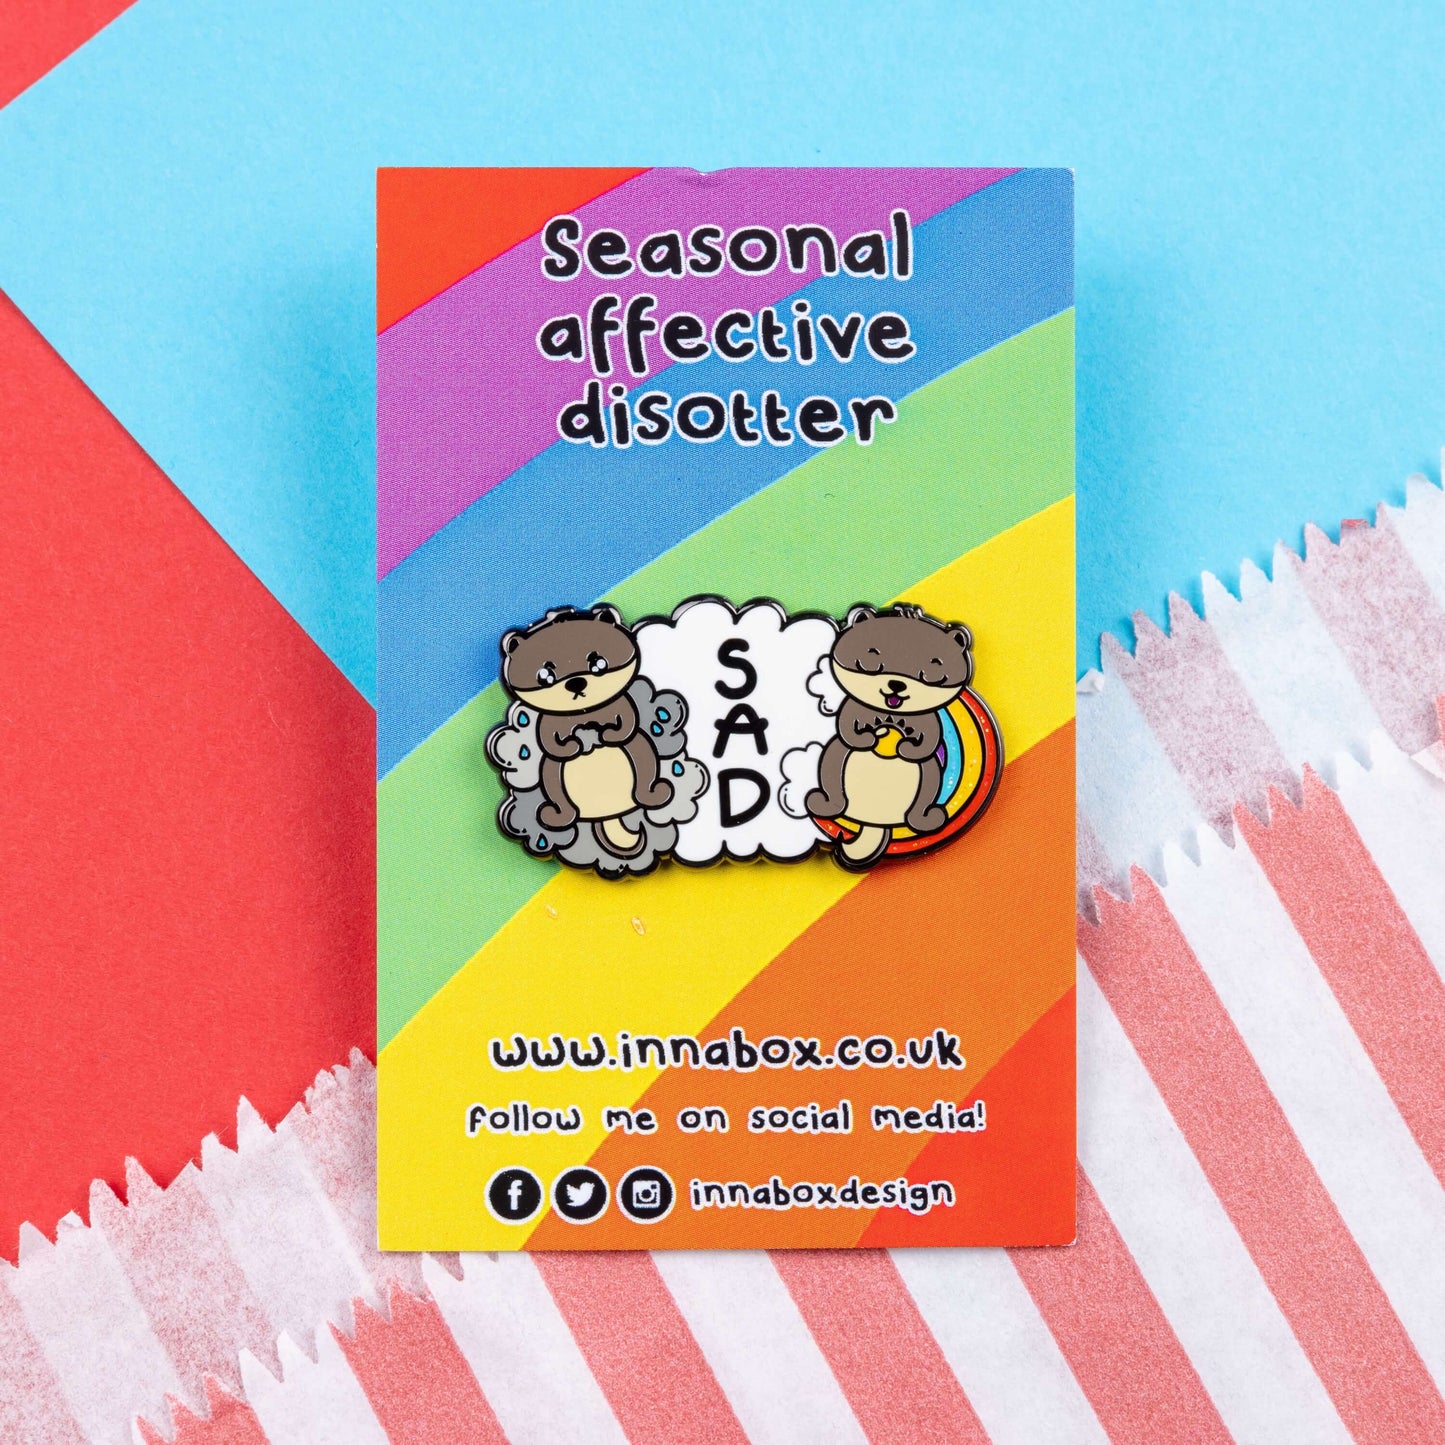 The Seasonal Affective Otter Enamel Pin - Seasonal Affective Disorder SAD on rainbow backing card laid on a red and blue card background. The cloud shaped pin has two otters on either side, one sad on a raincloud clutching a raincloud and the other smiling on a rainbow clutching a sunshine. In the middle is the initials 'SAD'. The hand drawn design is raising awareness for Seasonal Affective Disorder.